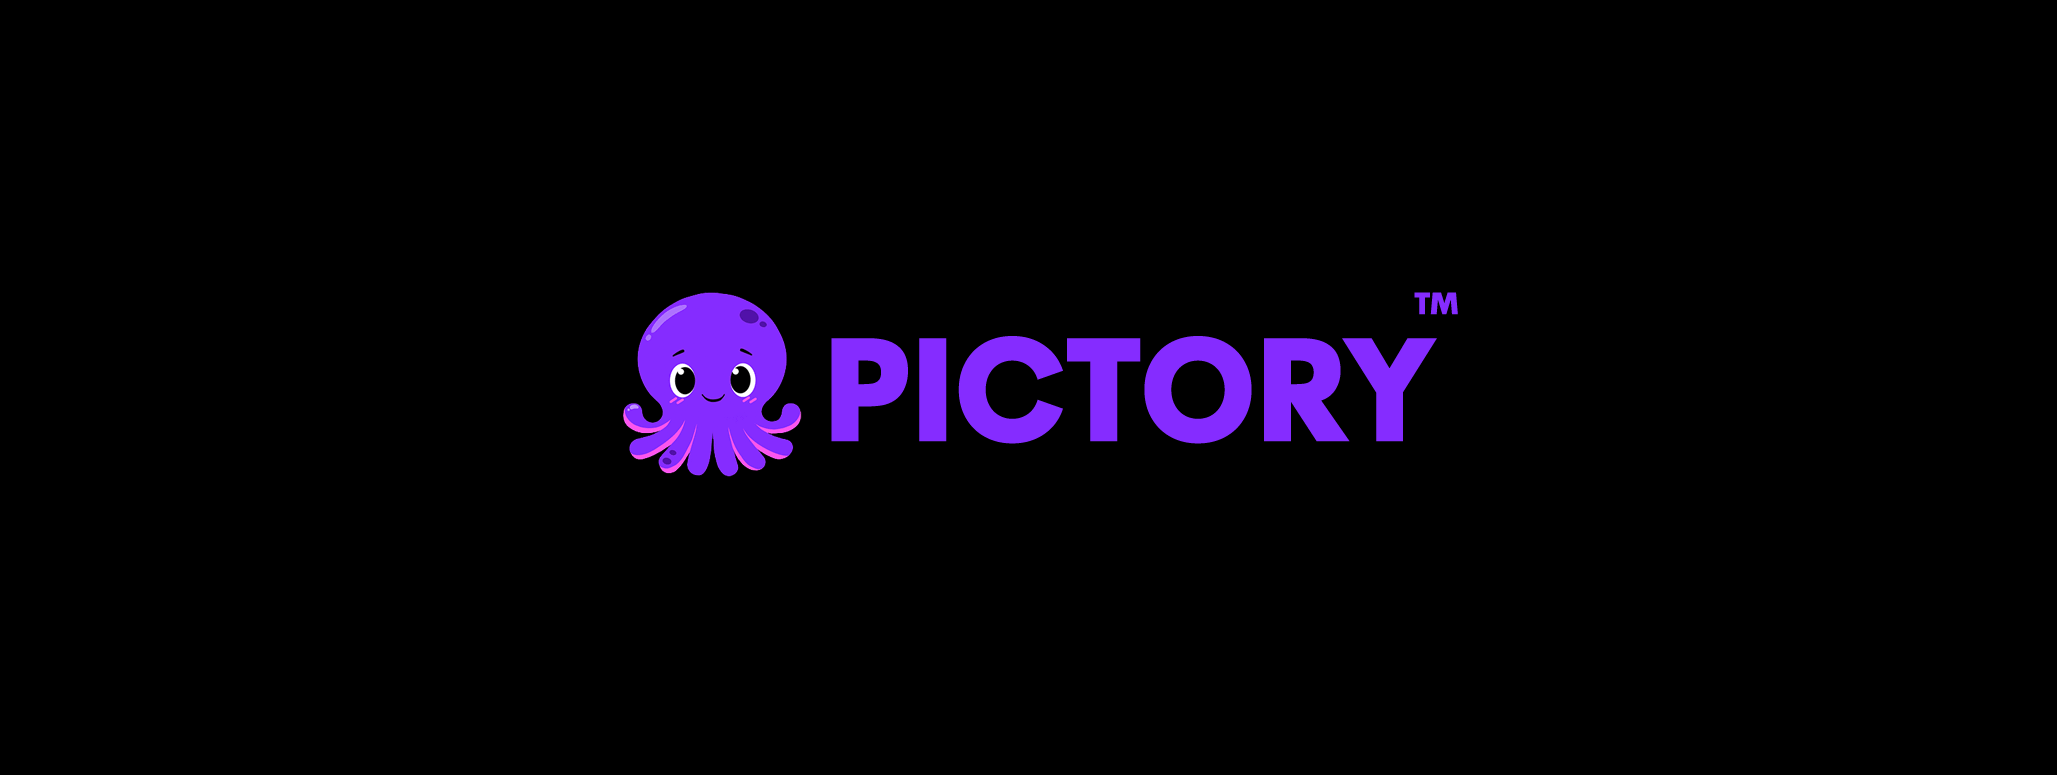 Pictory AI - Easy Video Creation for Content Marketers